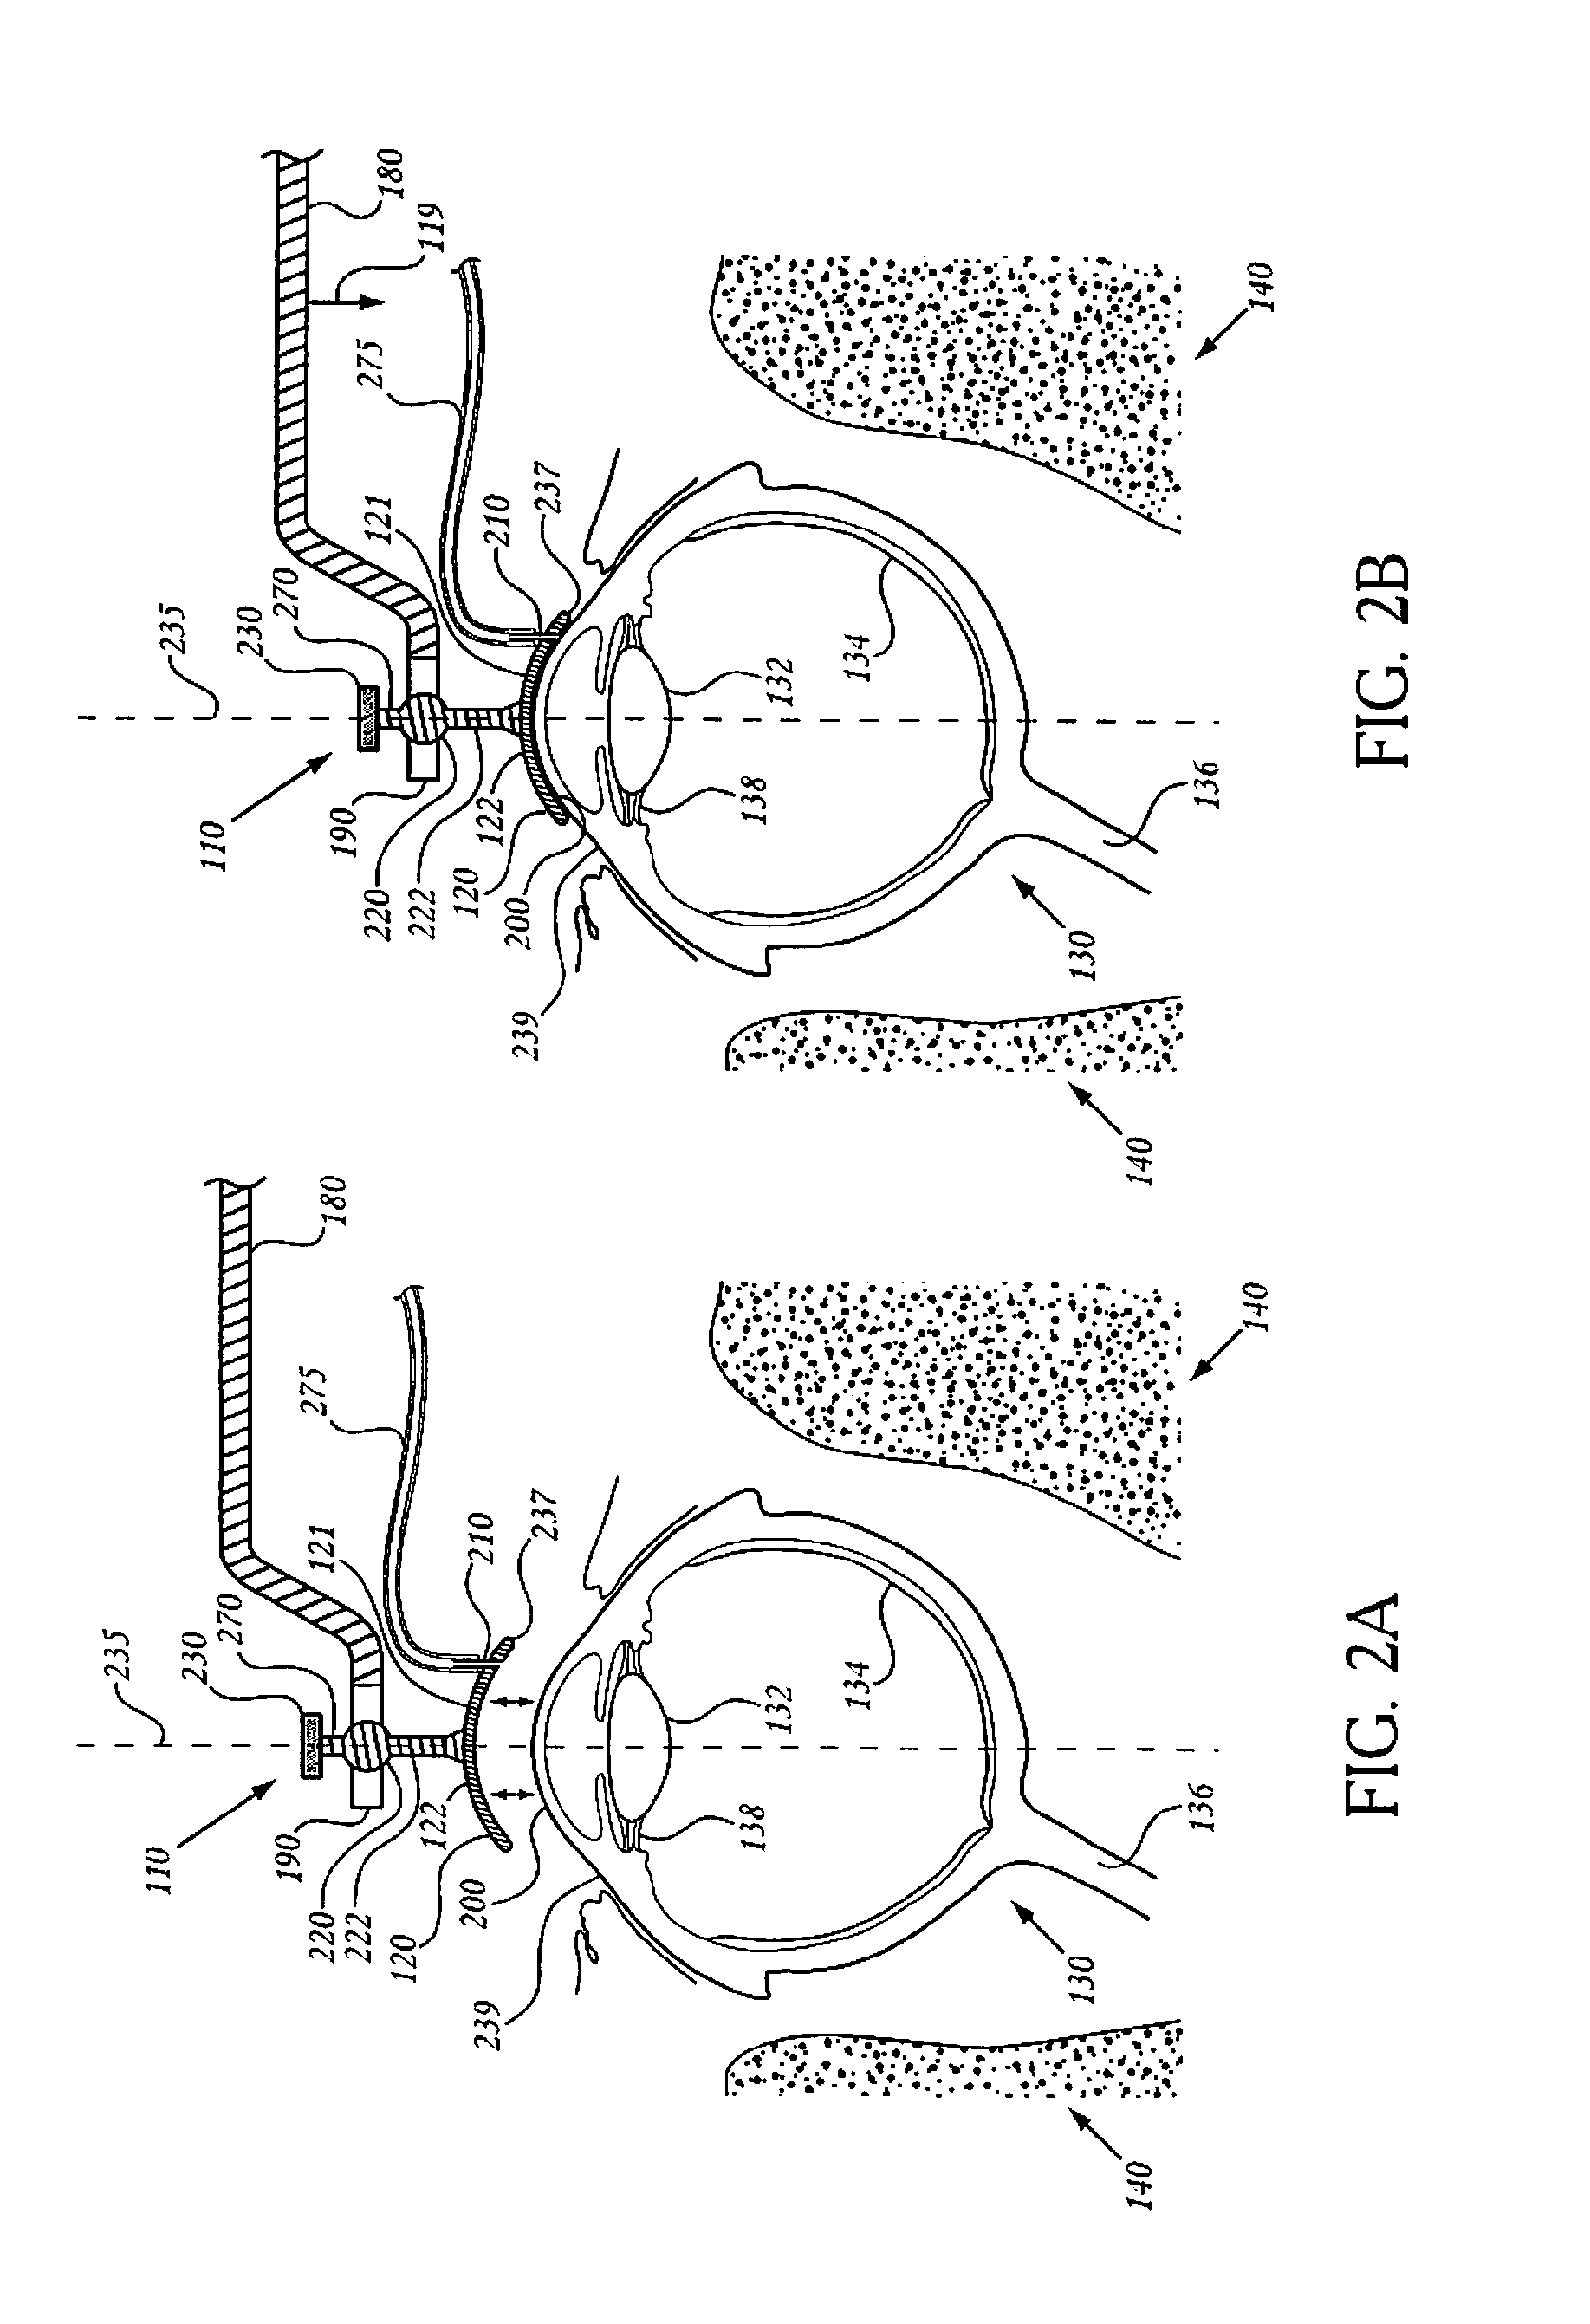 System and method for performing an ocular irradiation procedure